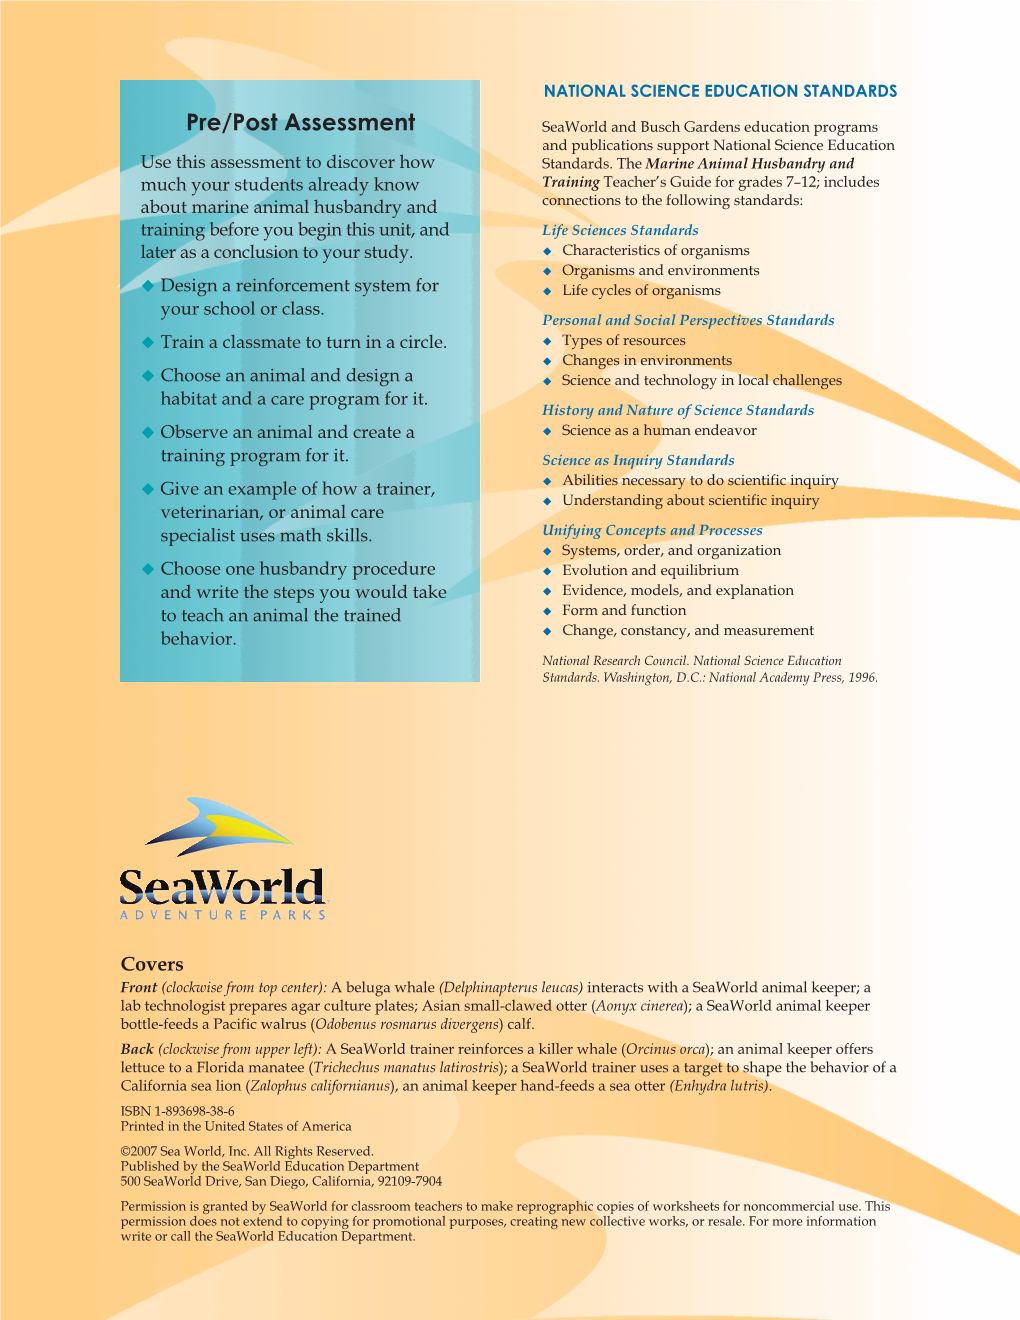 Pre/Post Assessment Seaworld and Busch Gardens Education Programs and Publications Support National Science Education Use This Assessment to Discover How Standards